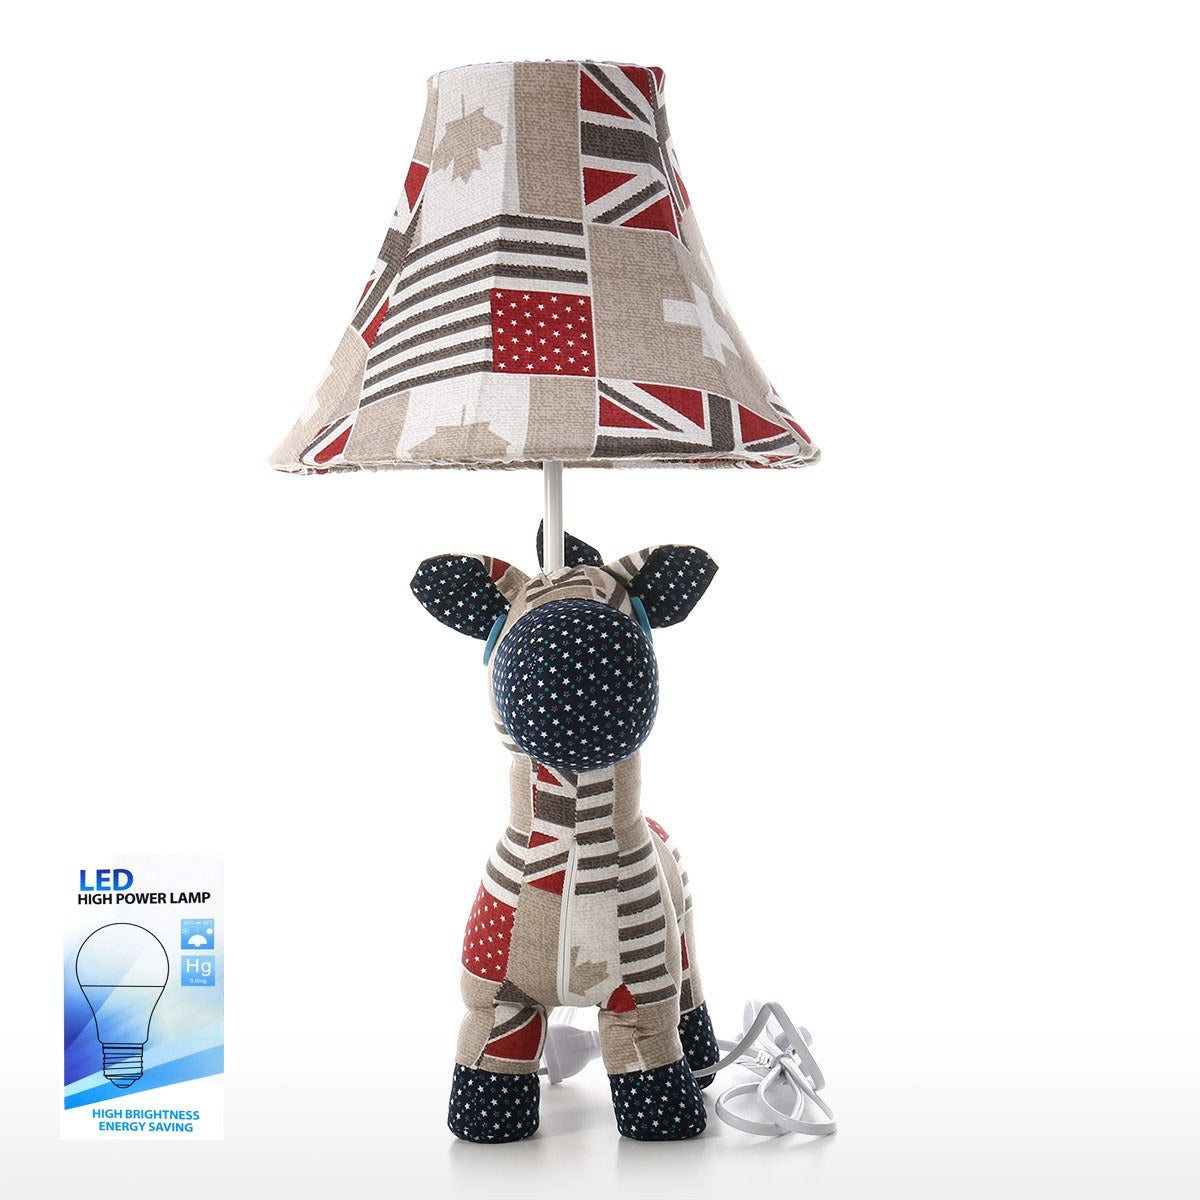 Table Lamp and Desk Lamp with Horse for Nursery Decor